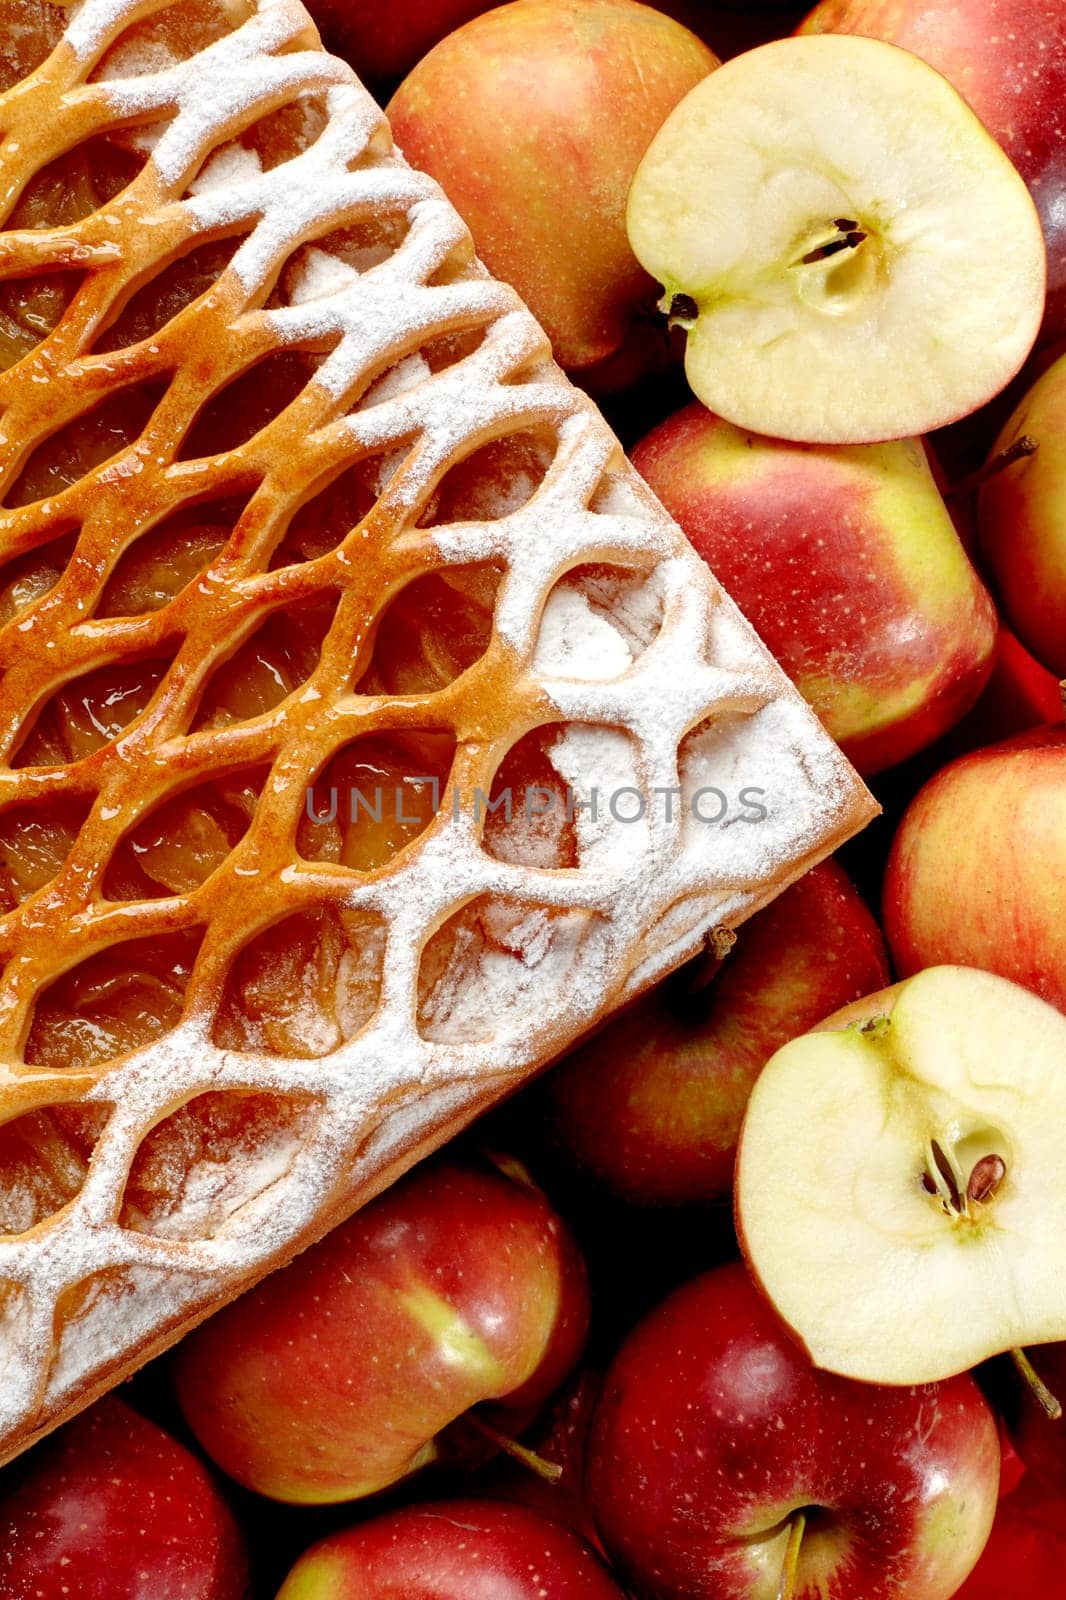 Sweet lattice fruit galette on checkered tablecloth with ripe apples by nazarovsergey